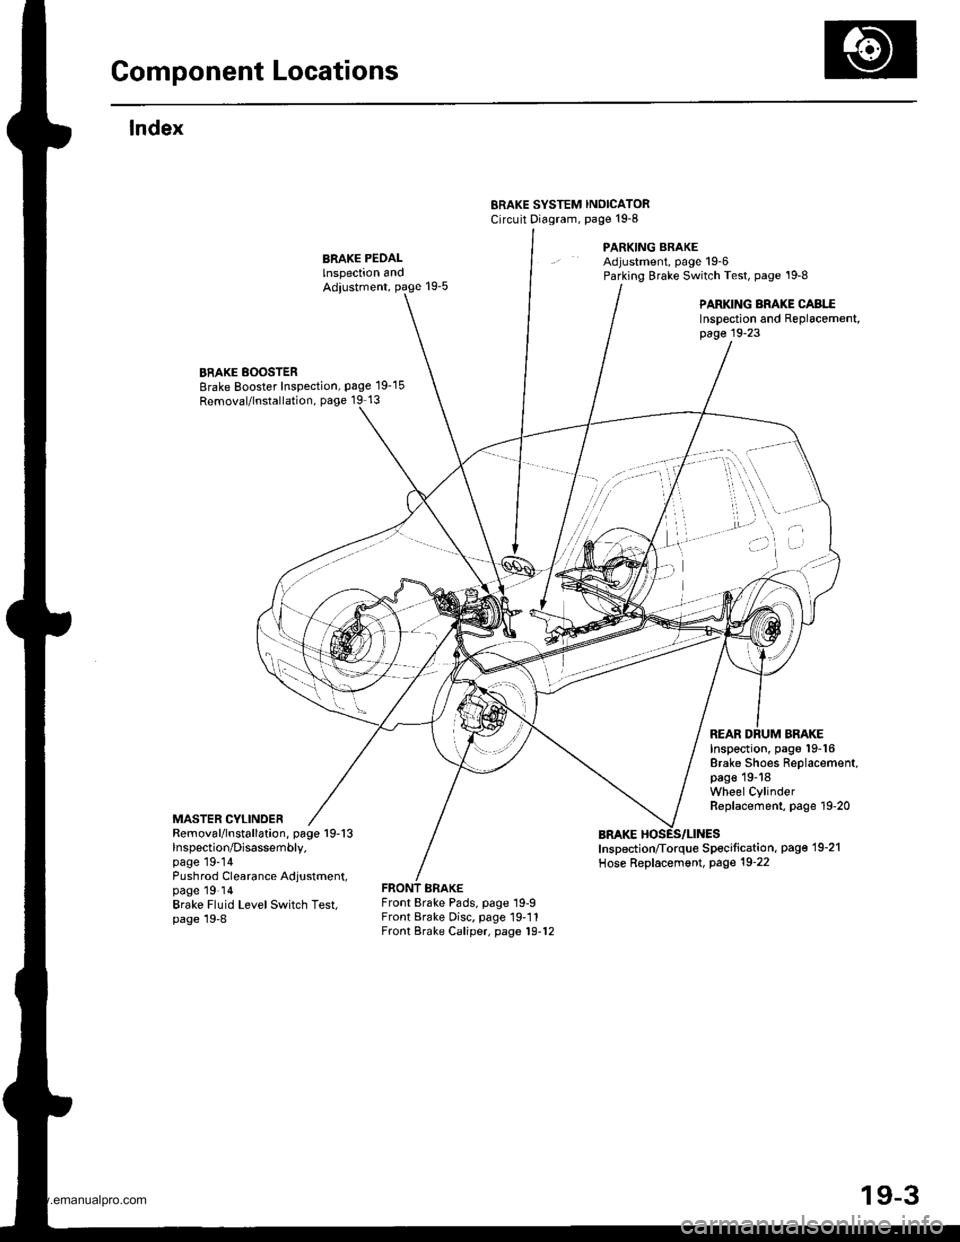 HONDA CR-V 1999 RD1-RD3 / 1.G User Guide 
Gomponent Locations
lndex
ERAKE SYSTEM INOICATORCircuit Diagram, paget9-8
PARKING BRAKEAdjustment, page 19-6Parking Brake Switch Test, page 19-8
PARKING BRAKE CABI..EInspection and Replacement,page